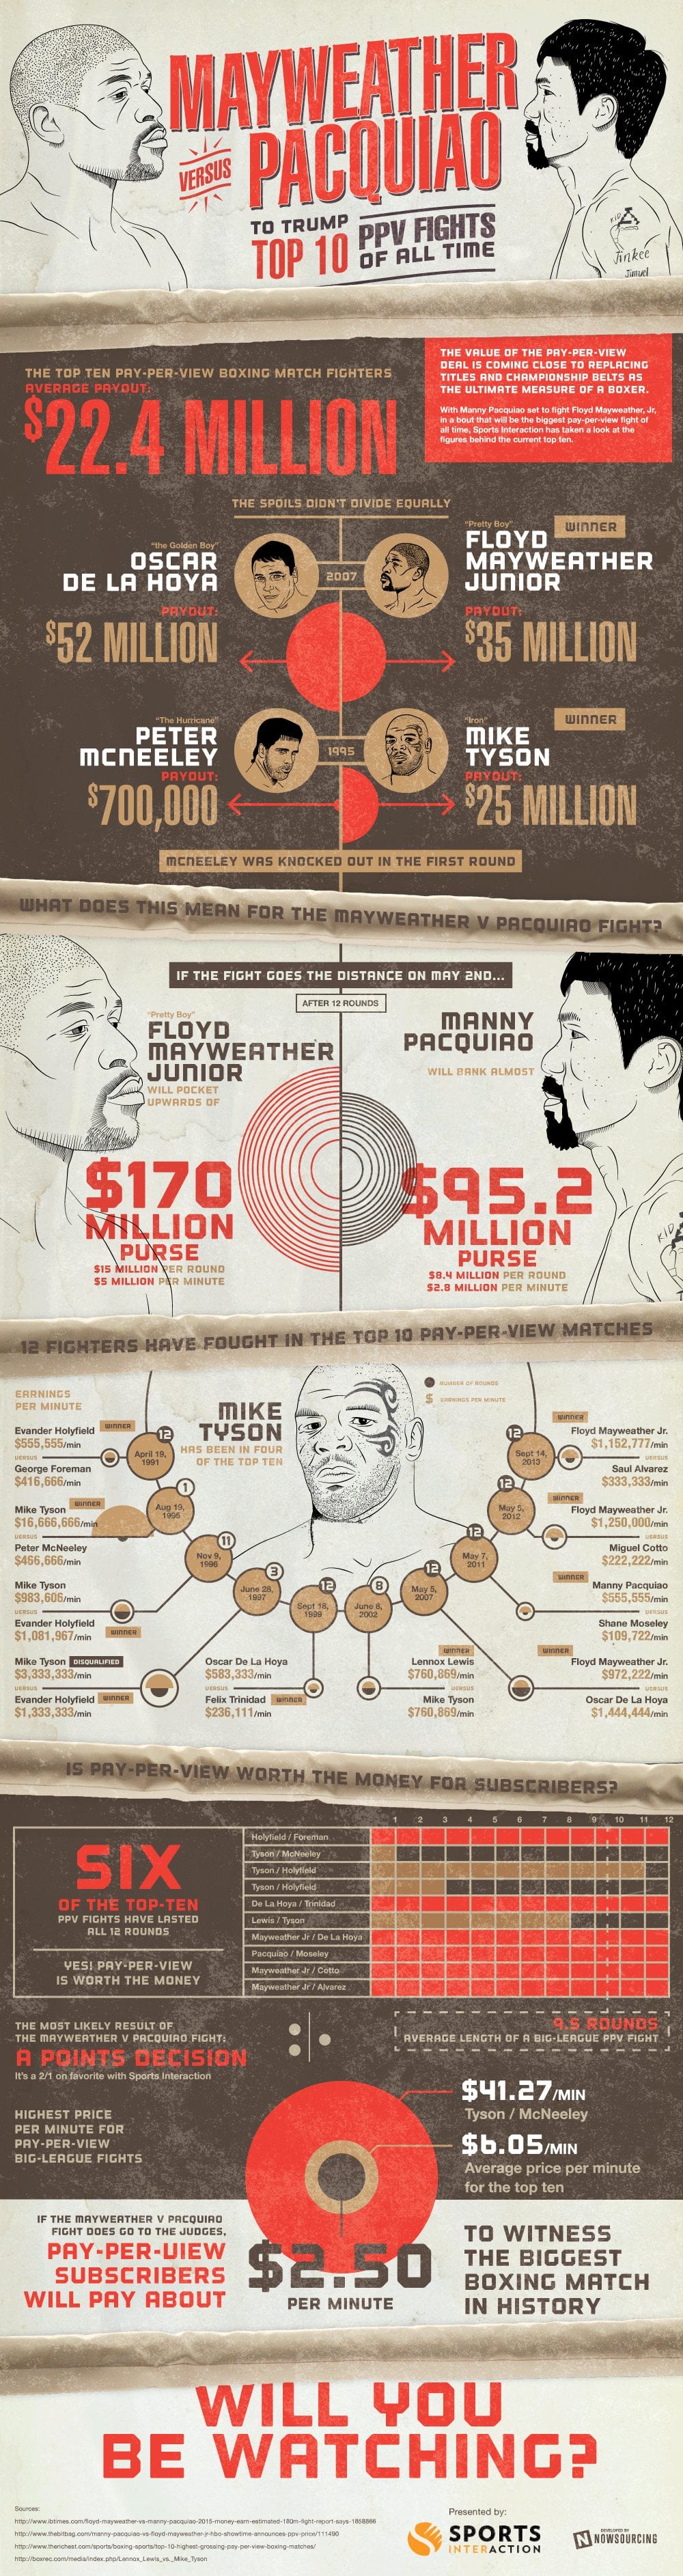 Mayweather vs Pacquiao PPV Boxing Infographic